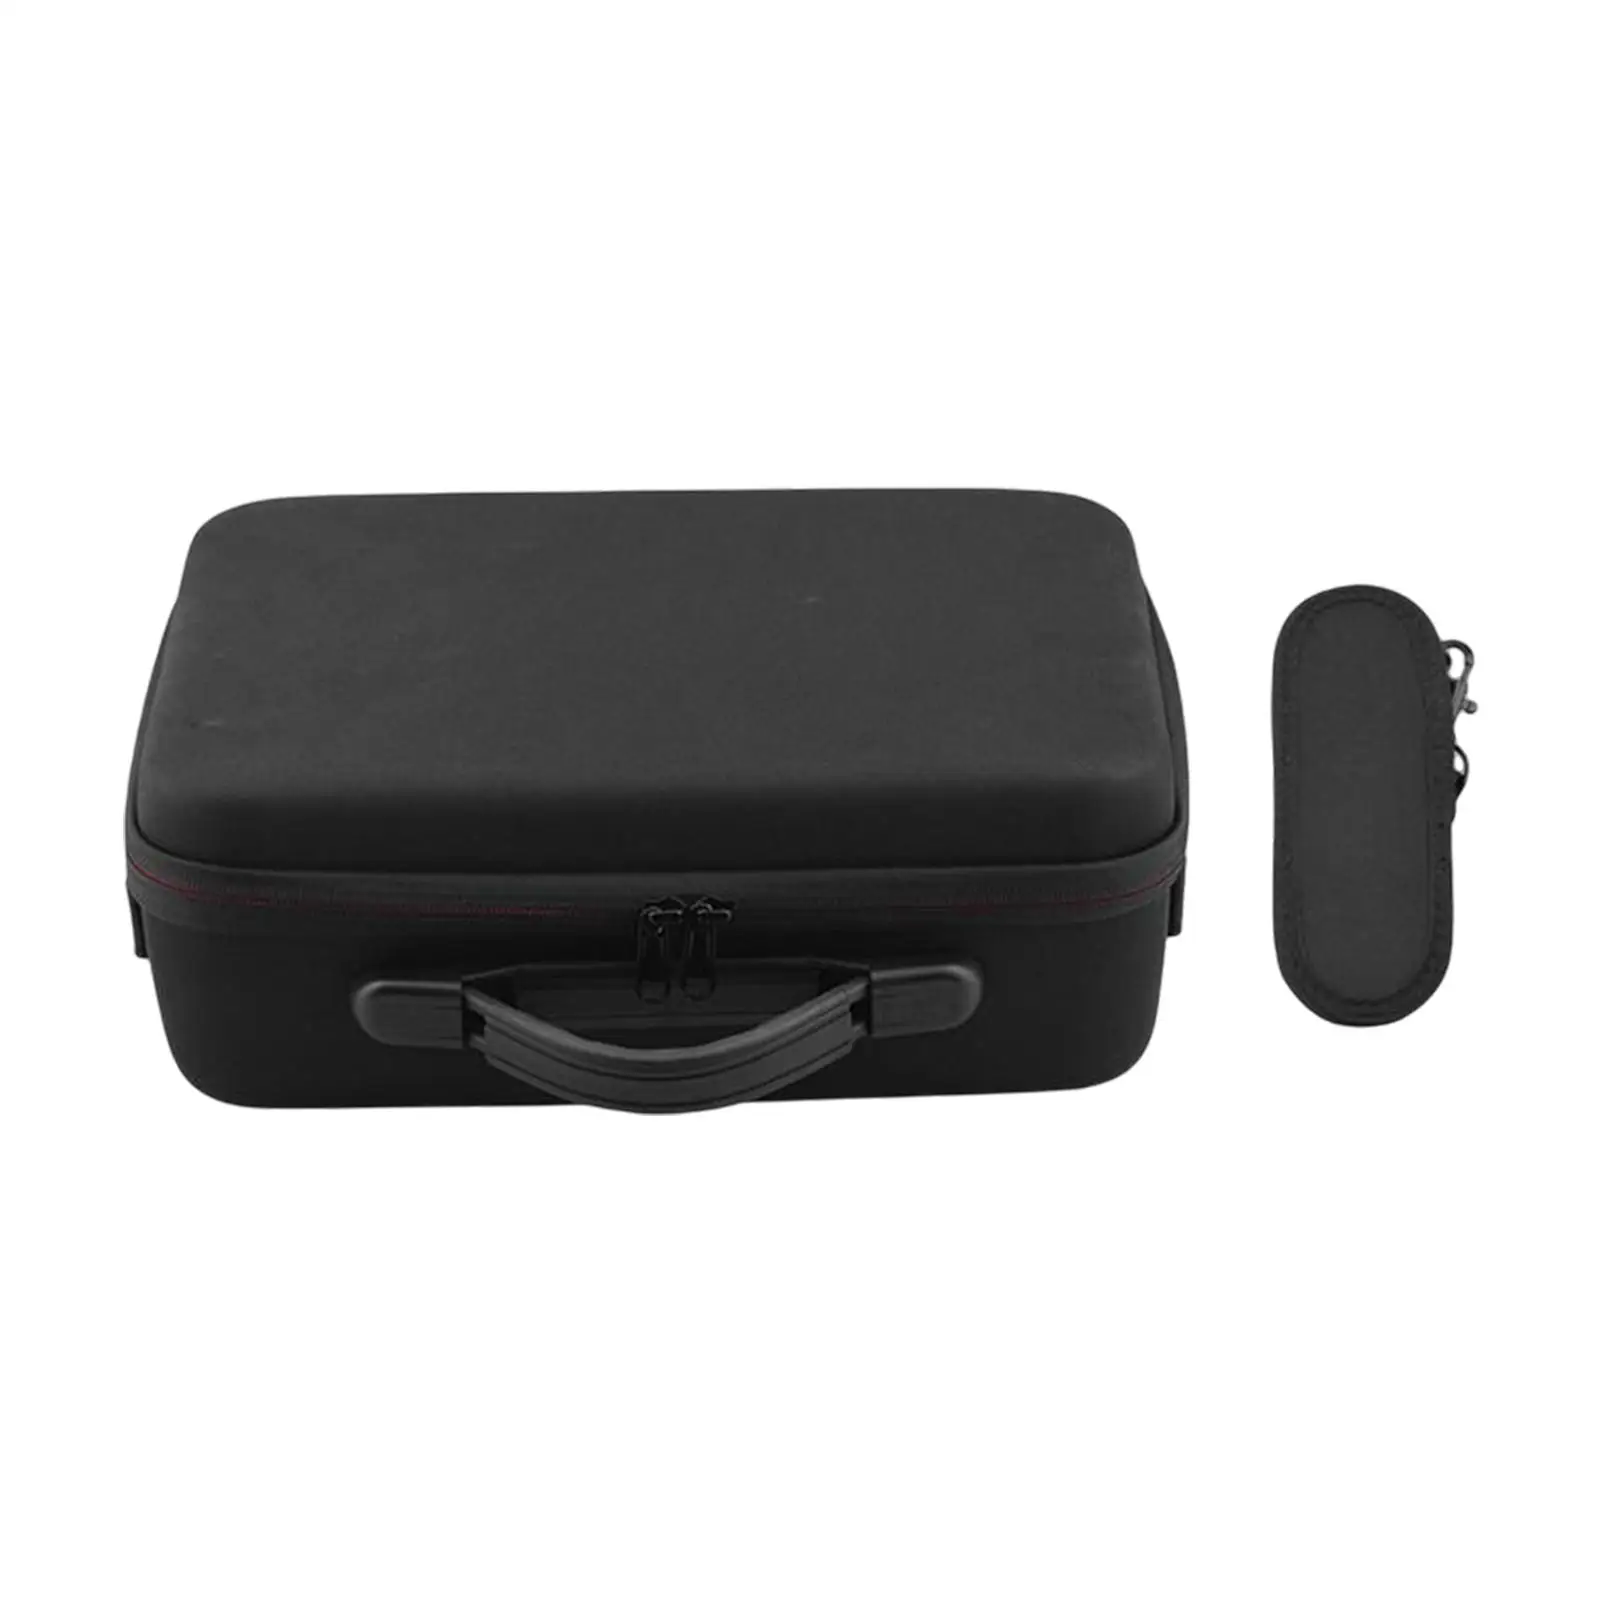 Portable Drone Carrying Remote Control Storage Travel Storage Bag Case | Storage Box Suitcase for protector Parts